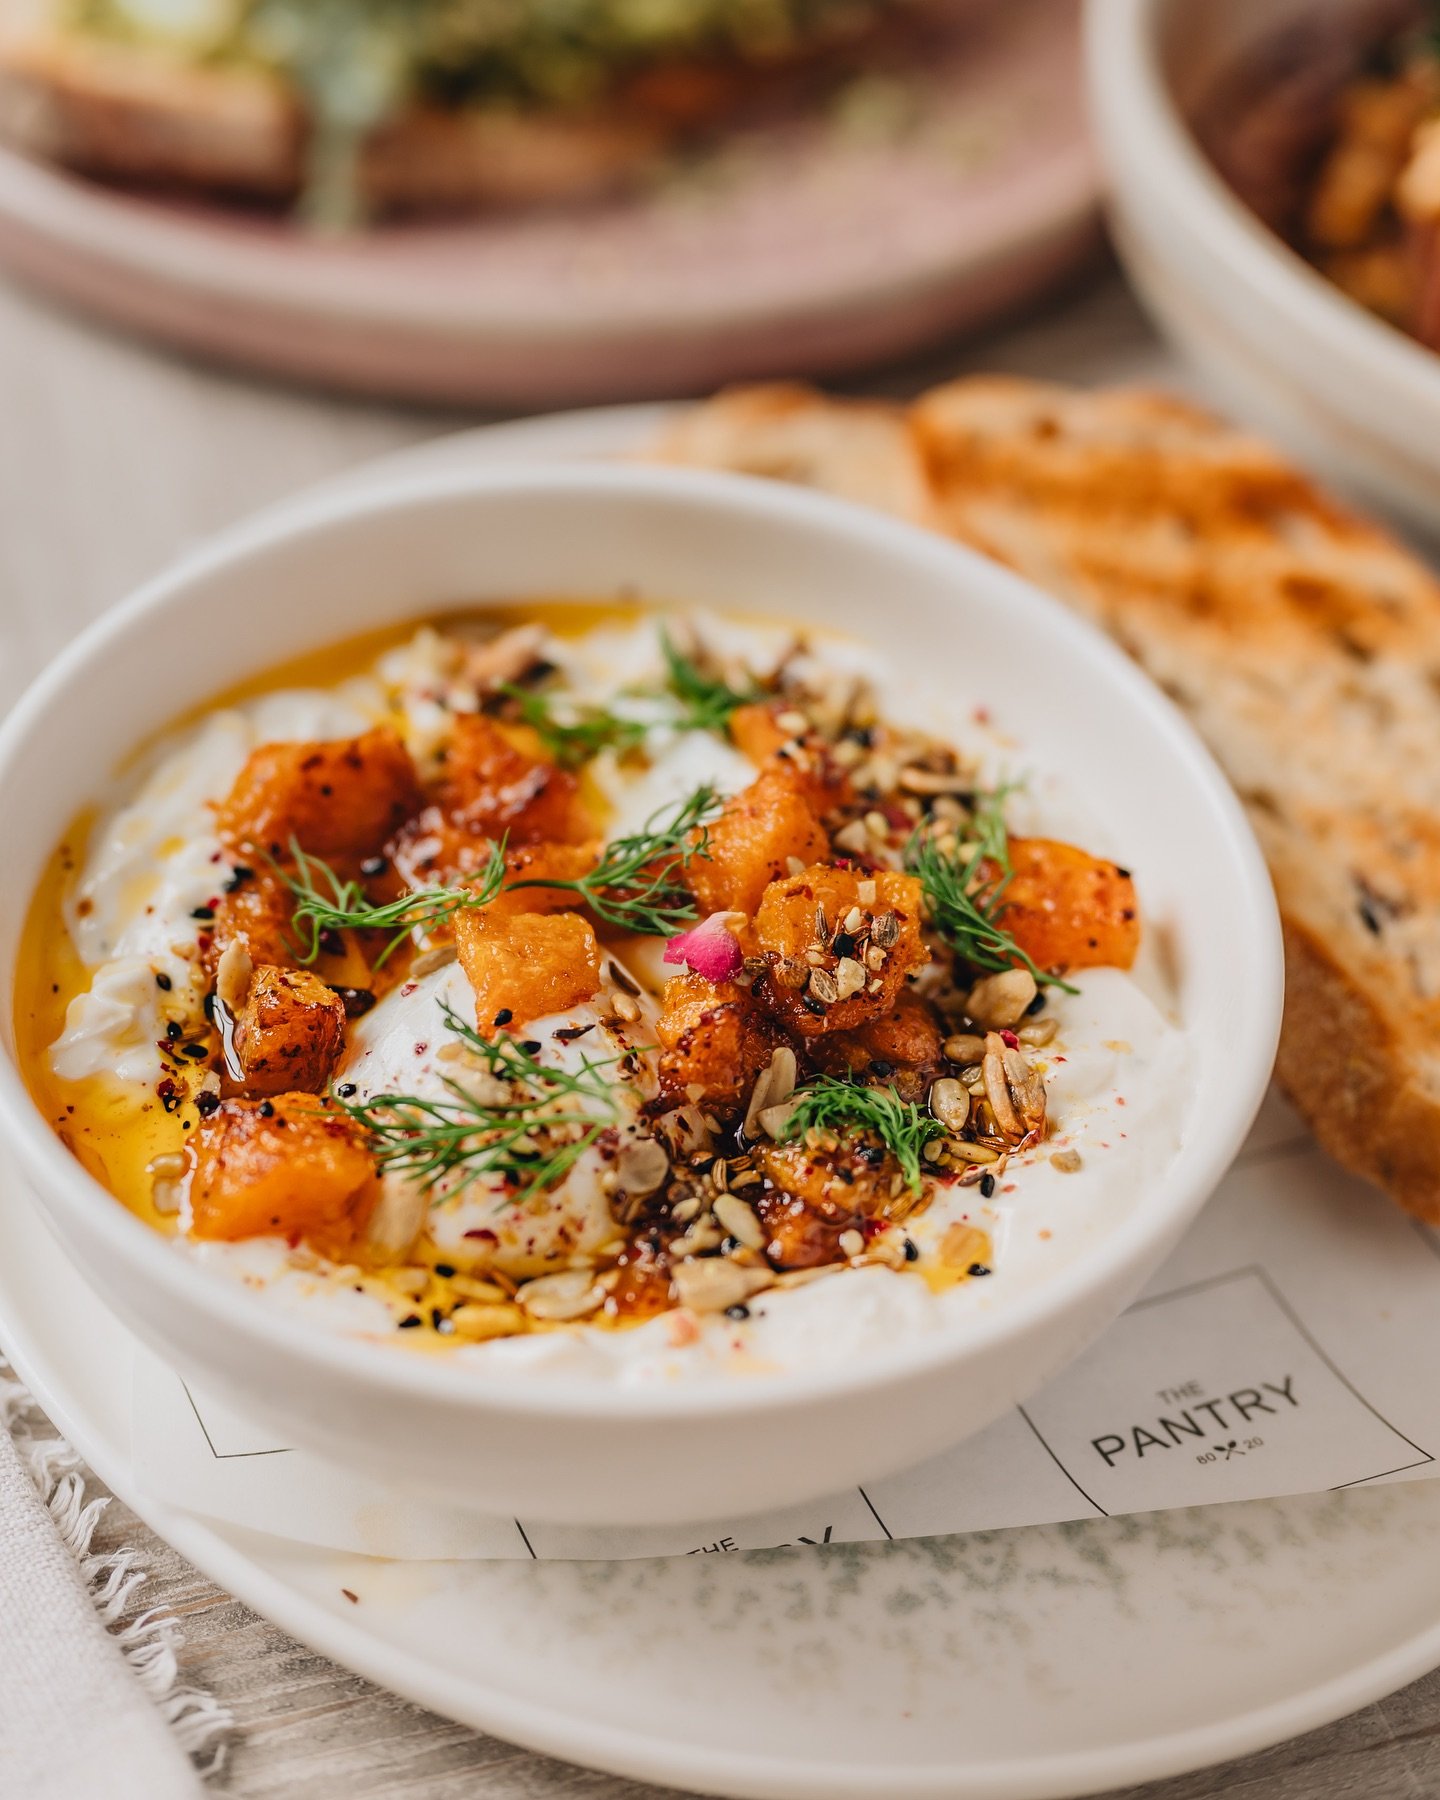 Here are our Turkish Eggs which are available in Brigg. They&rsquo;re a wonderful option for a healthy brunch whilst being packed full of flavour from the garlic yoghurt and harissa roasted squash, lovingly made by our talented team of chefs